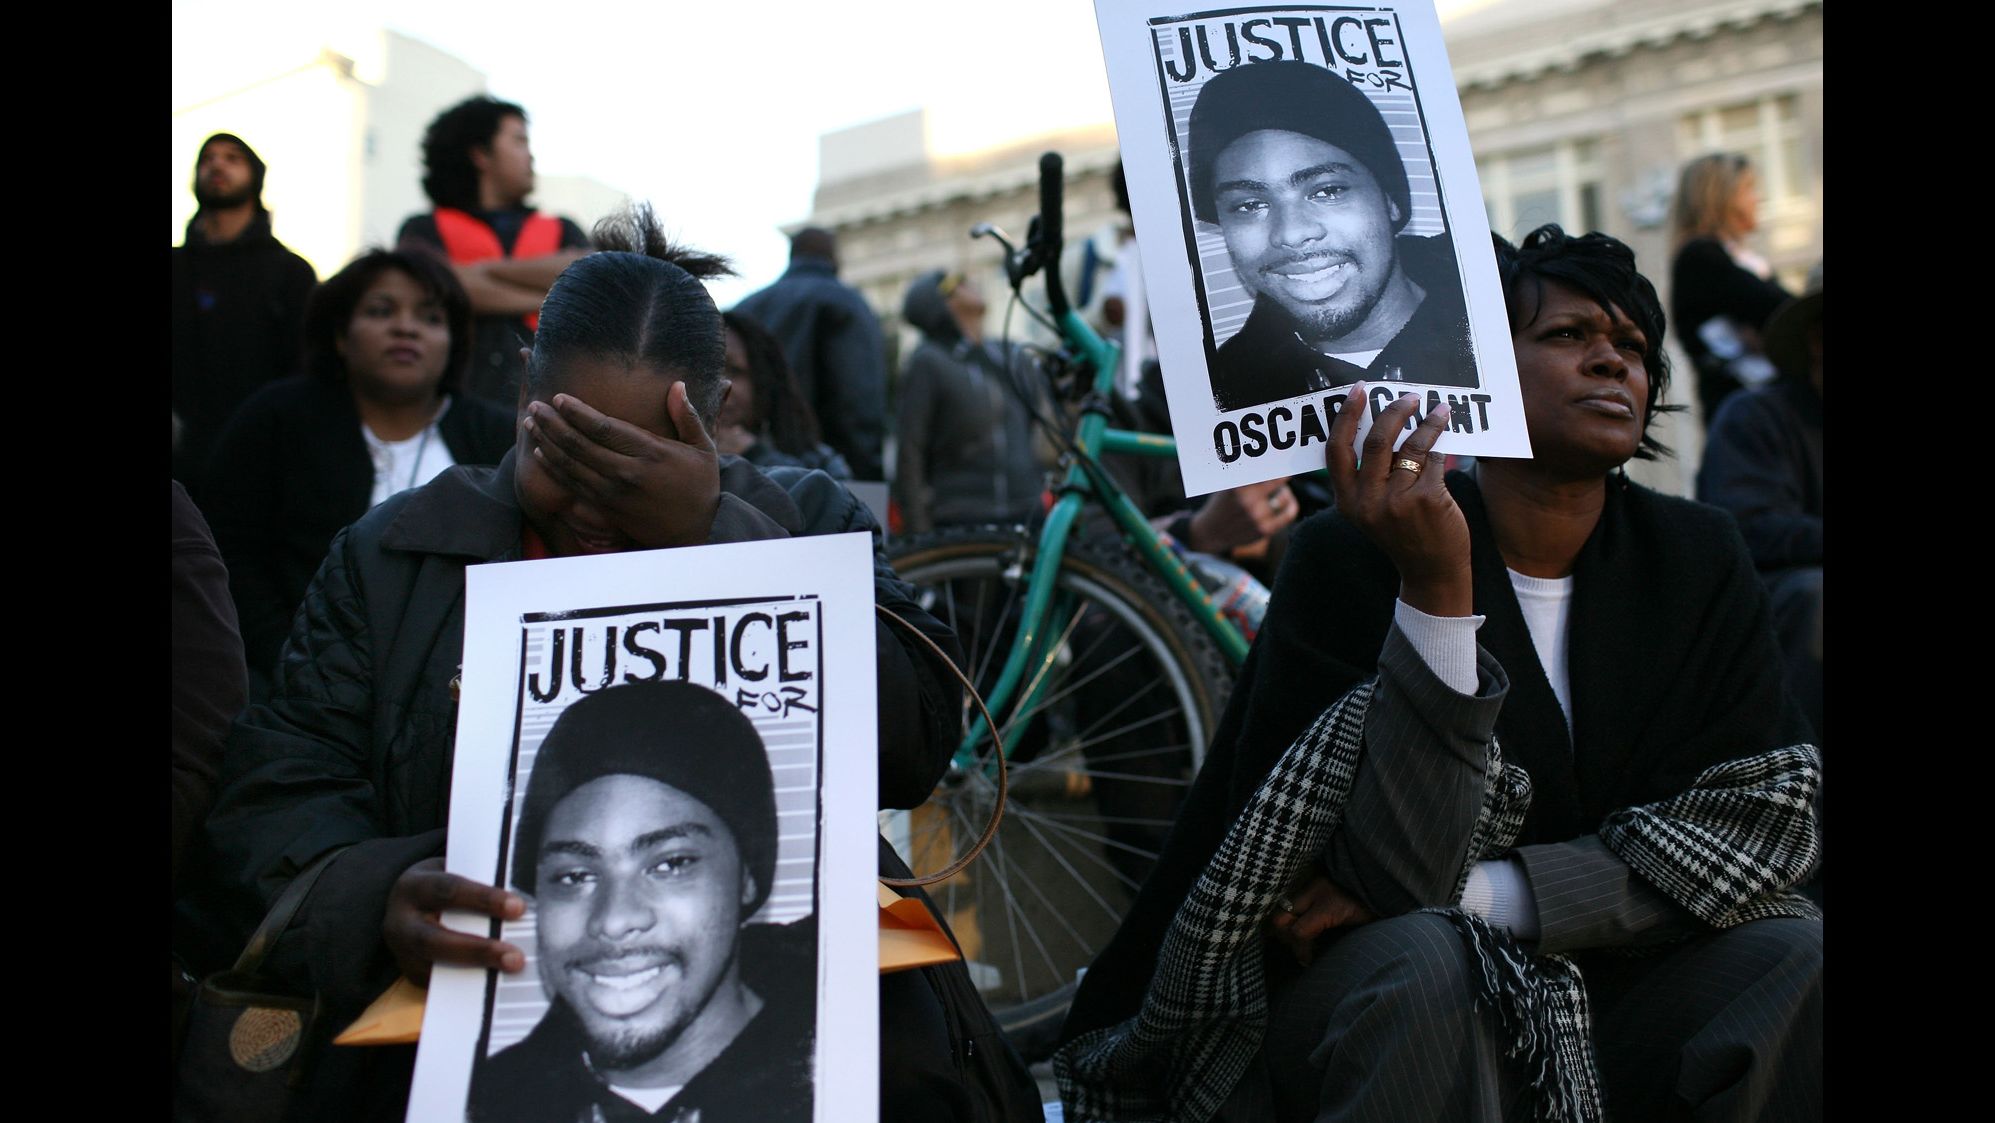 Protesters carry signs with a picture of Oscar Grant during a demonstration at Oakland City Hall on January 14, 2009.